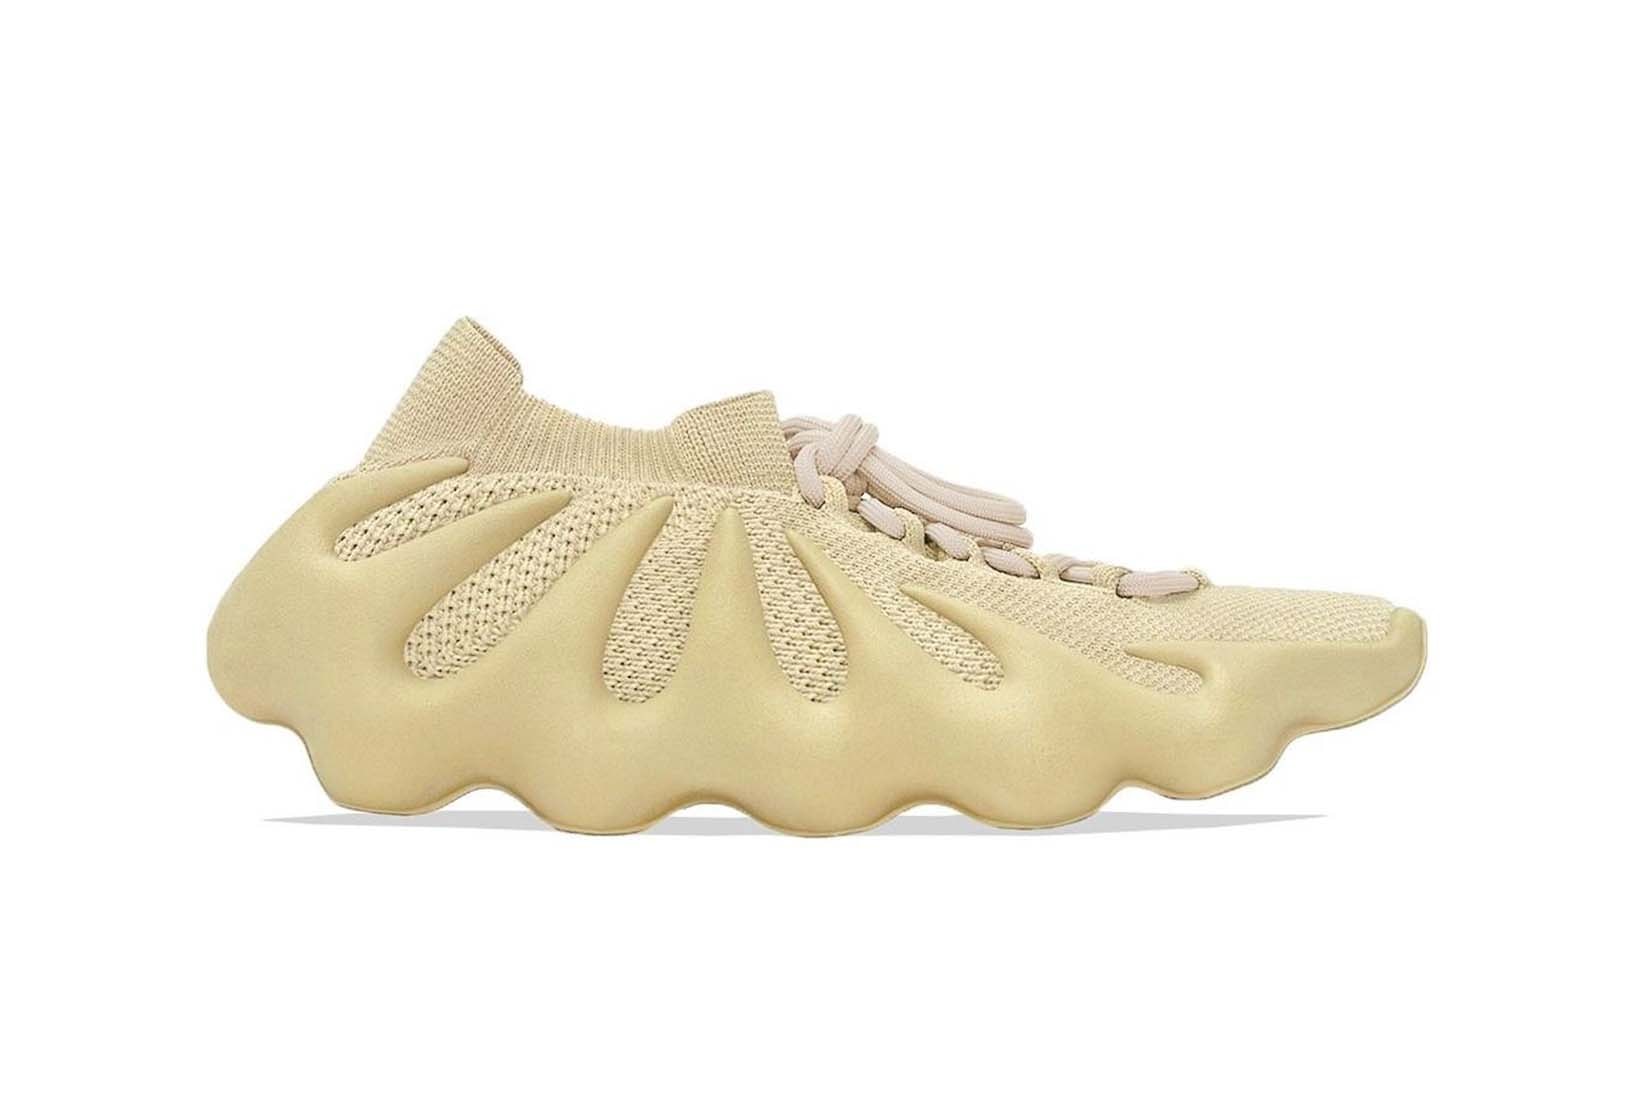 adidas YEEZY Kanye West 450 Sulfur Price Release Date Collaboration